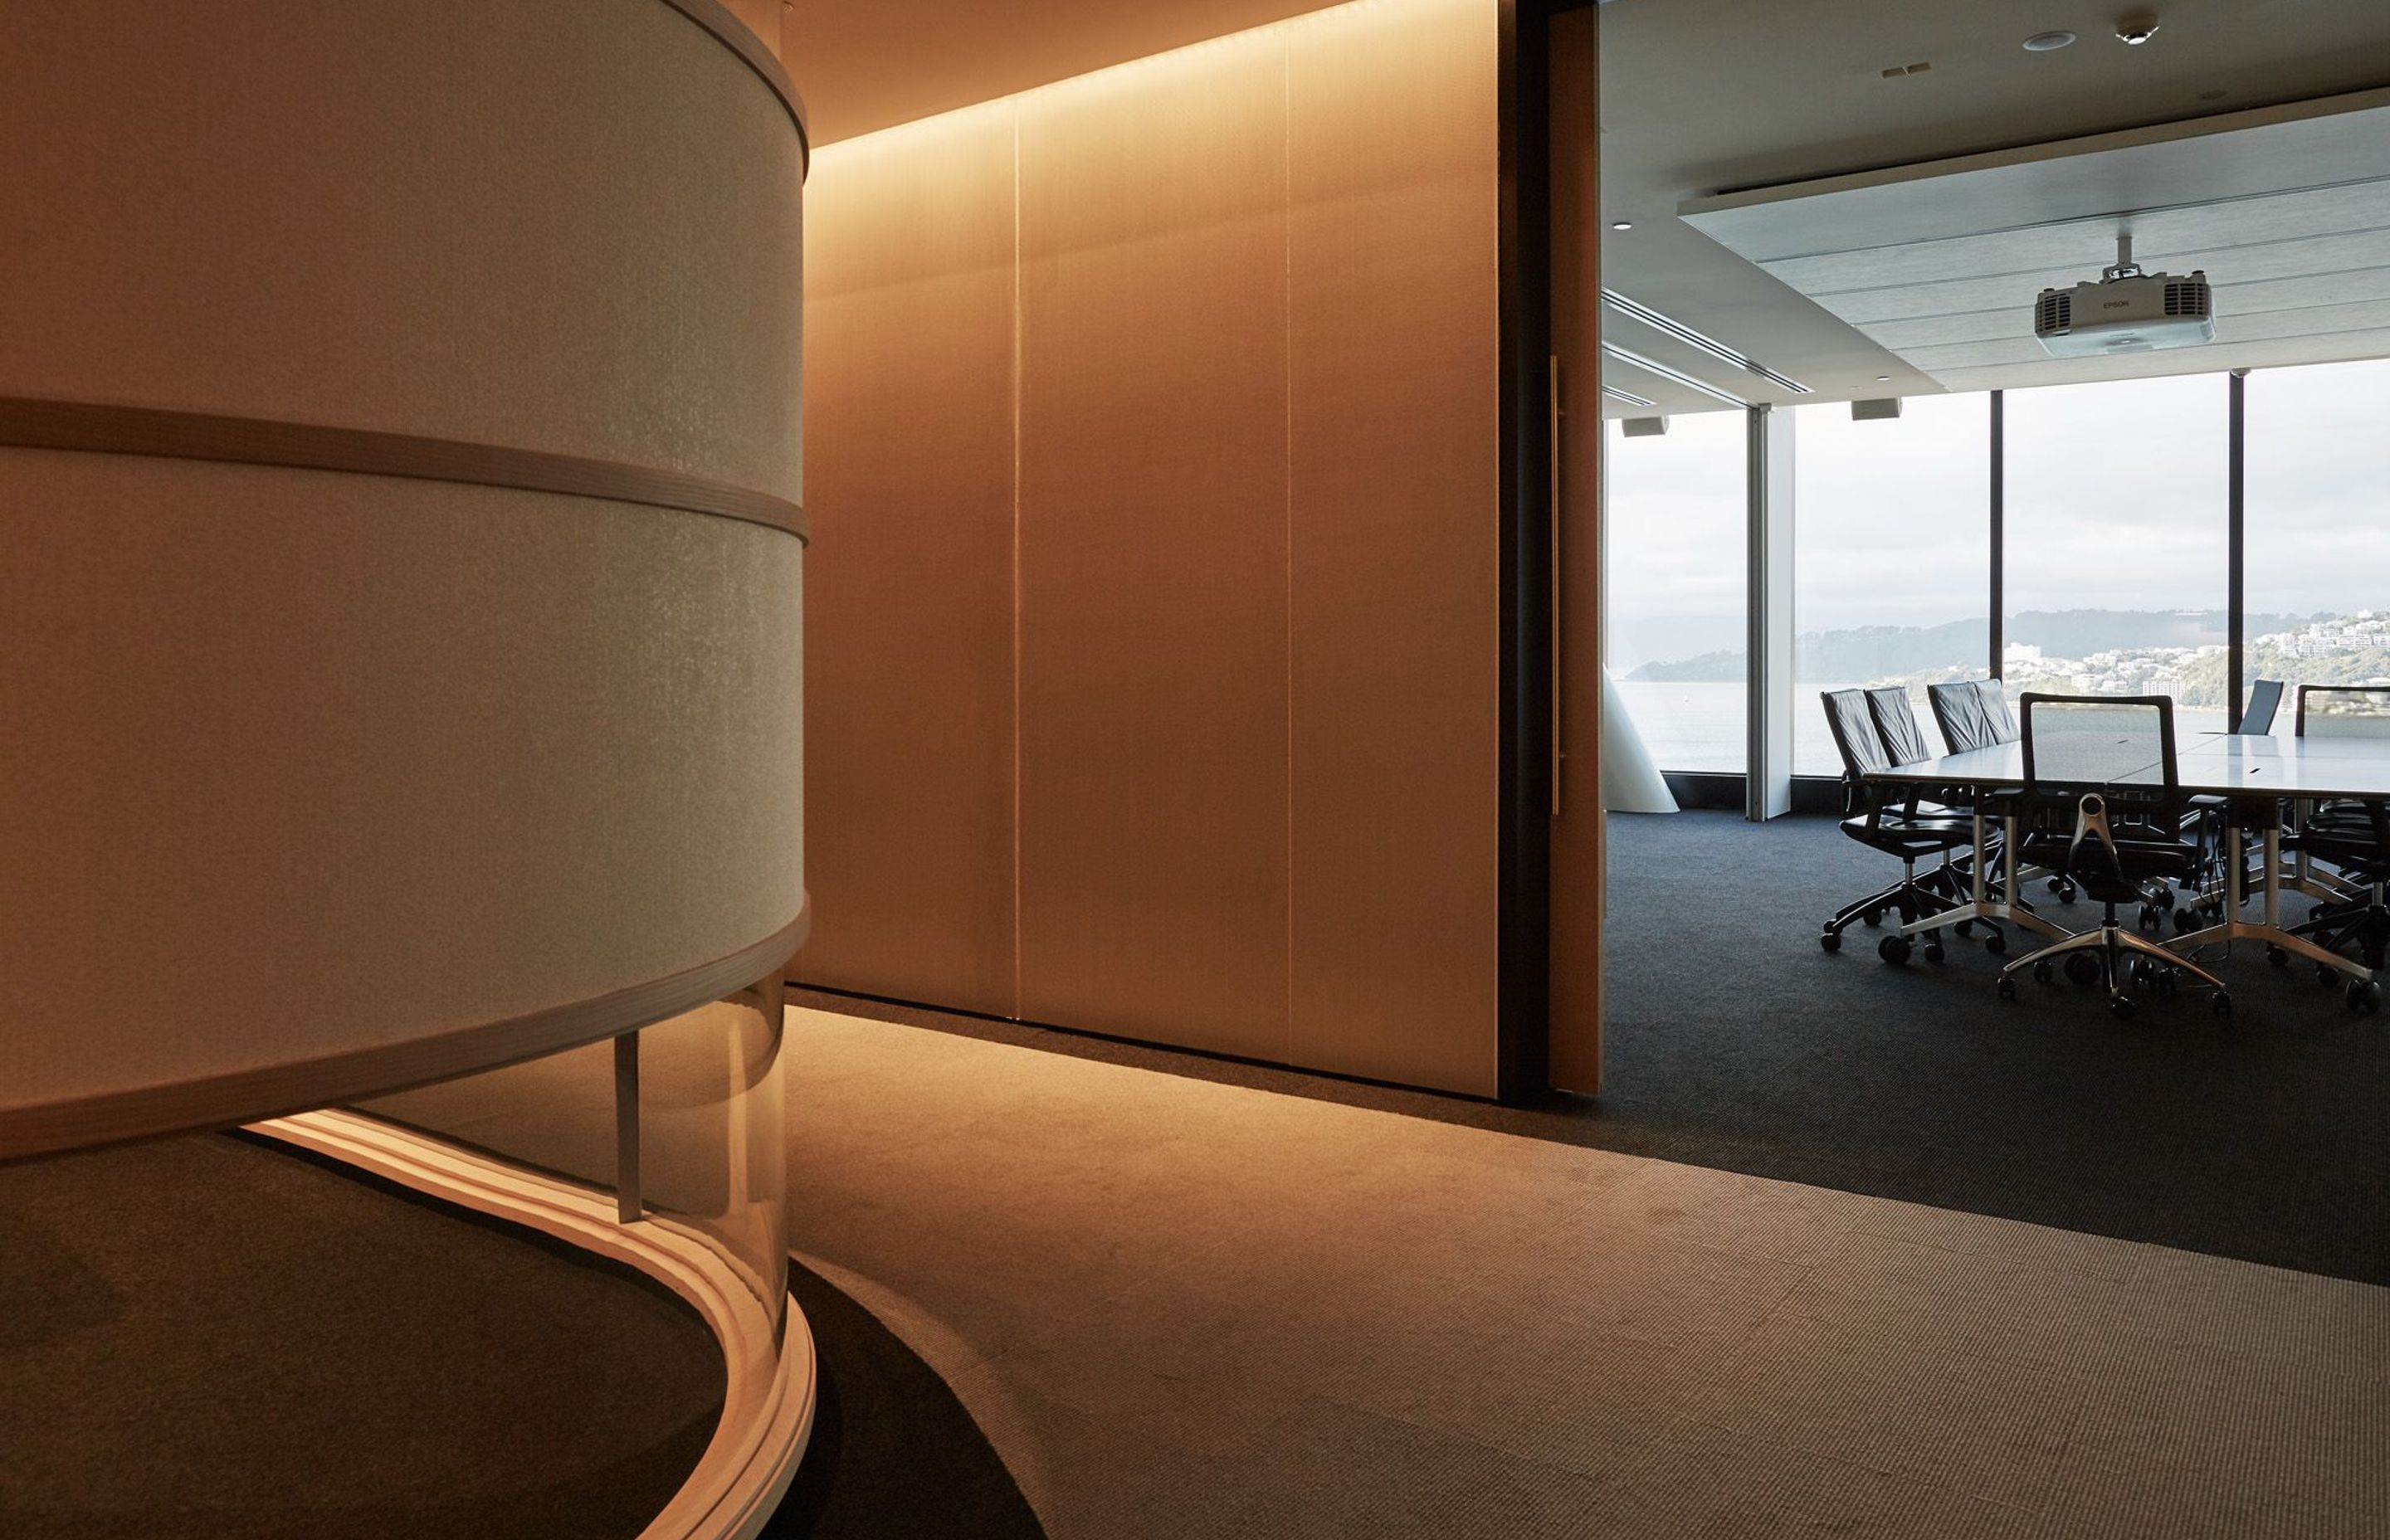 Large meeting rooms run around the edges of the building with views of Wellington Harbour and the neighbouring cityscape.